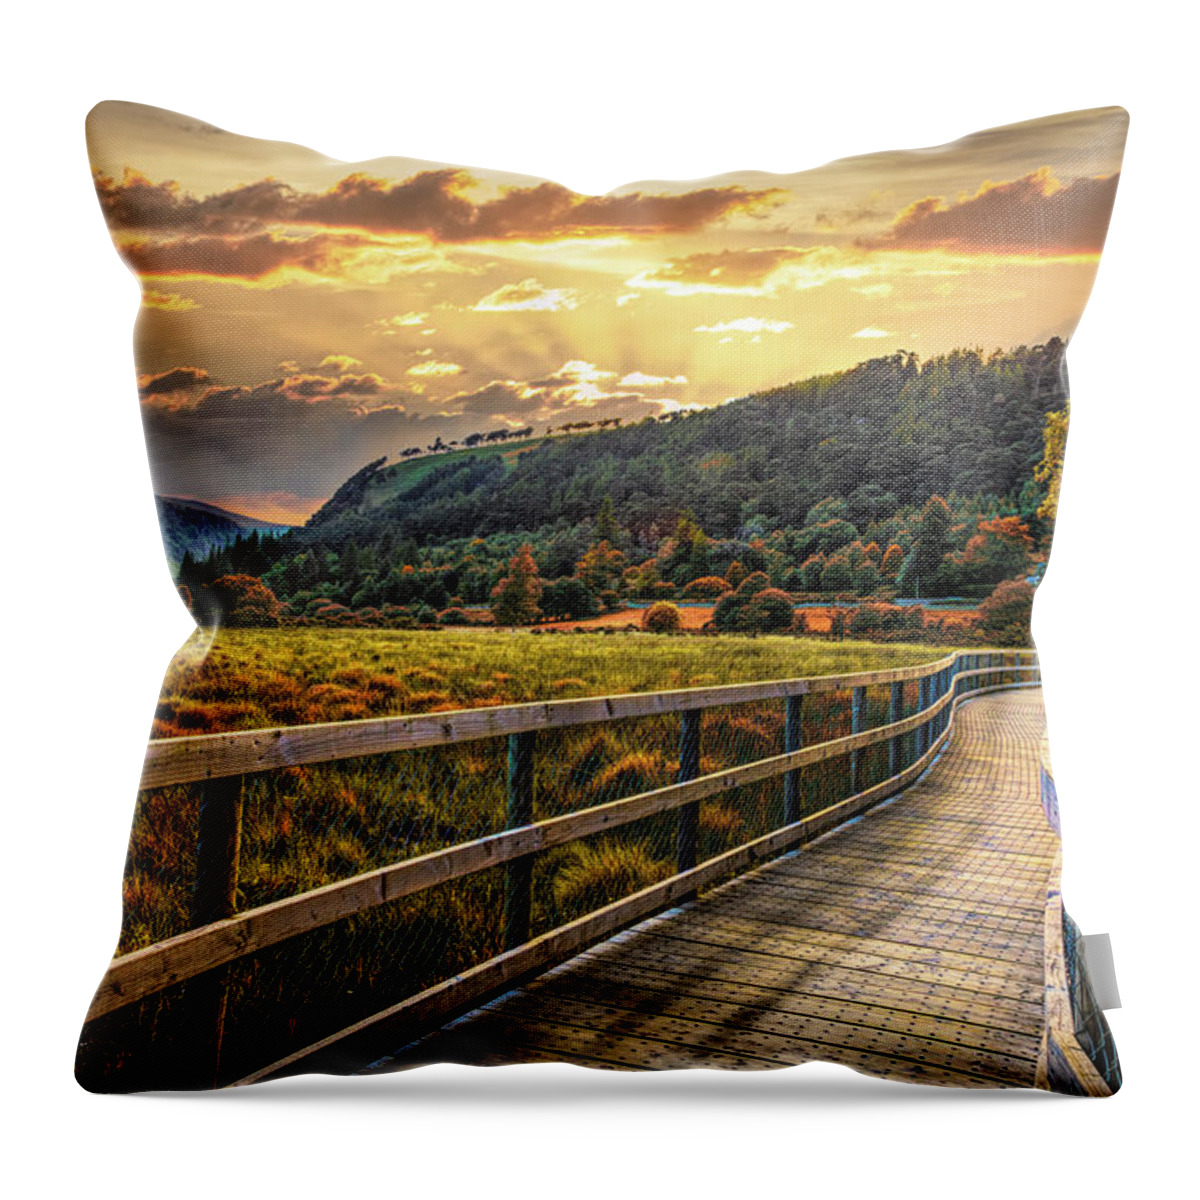 Clouds Throw Pillow featuring the photograph Winding Through the Glendalough Valley in Autumn by Debra and Dave Vanderlaan